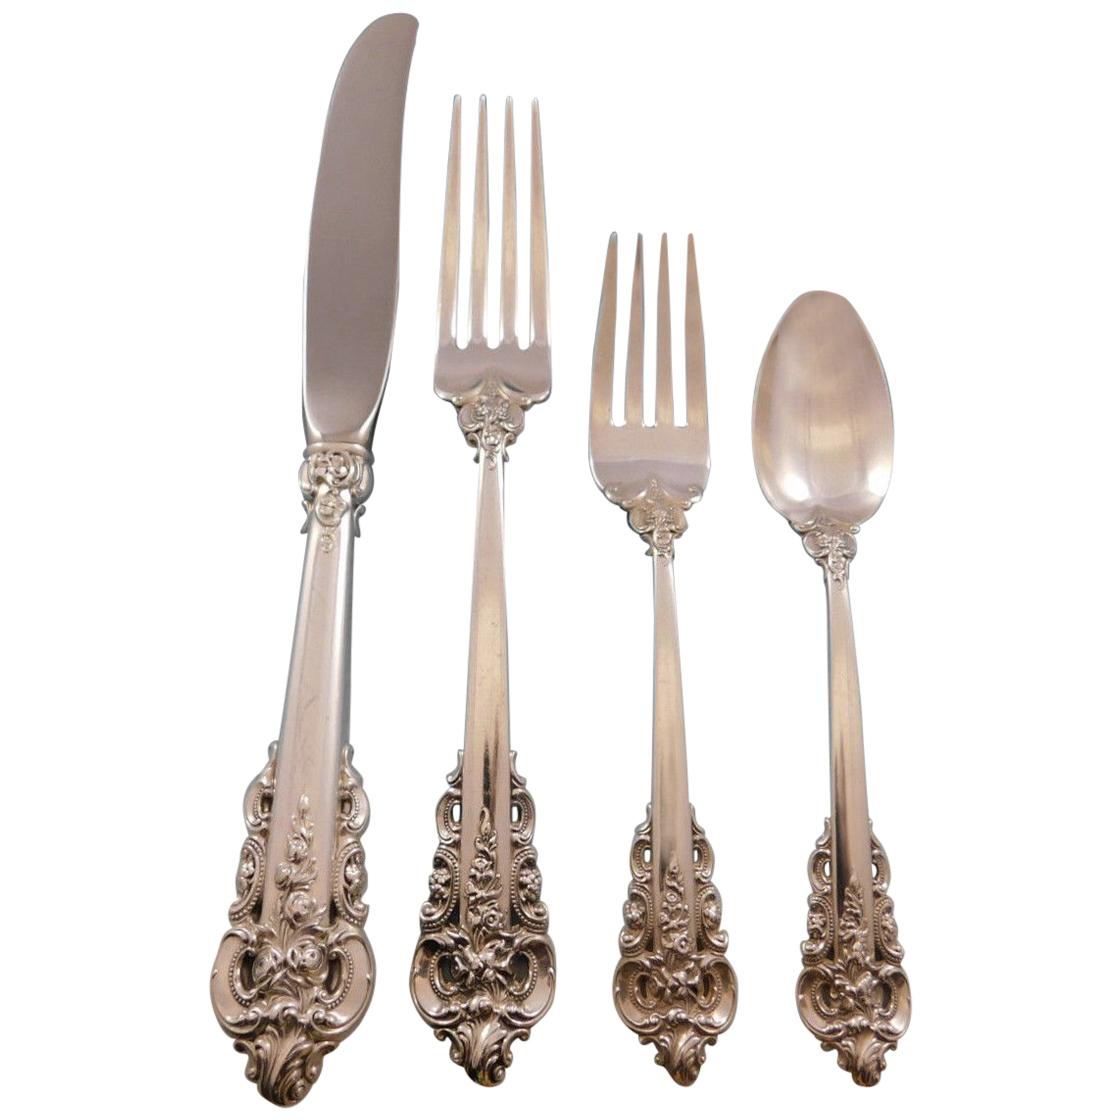 Grand Baroque Wallace Sterling Silver Flatware 5 piece place setting Estate Find 